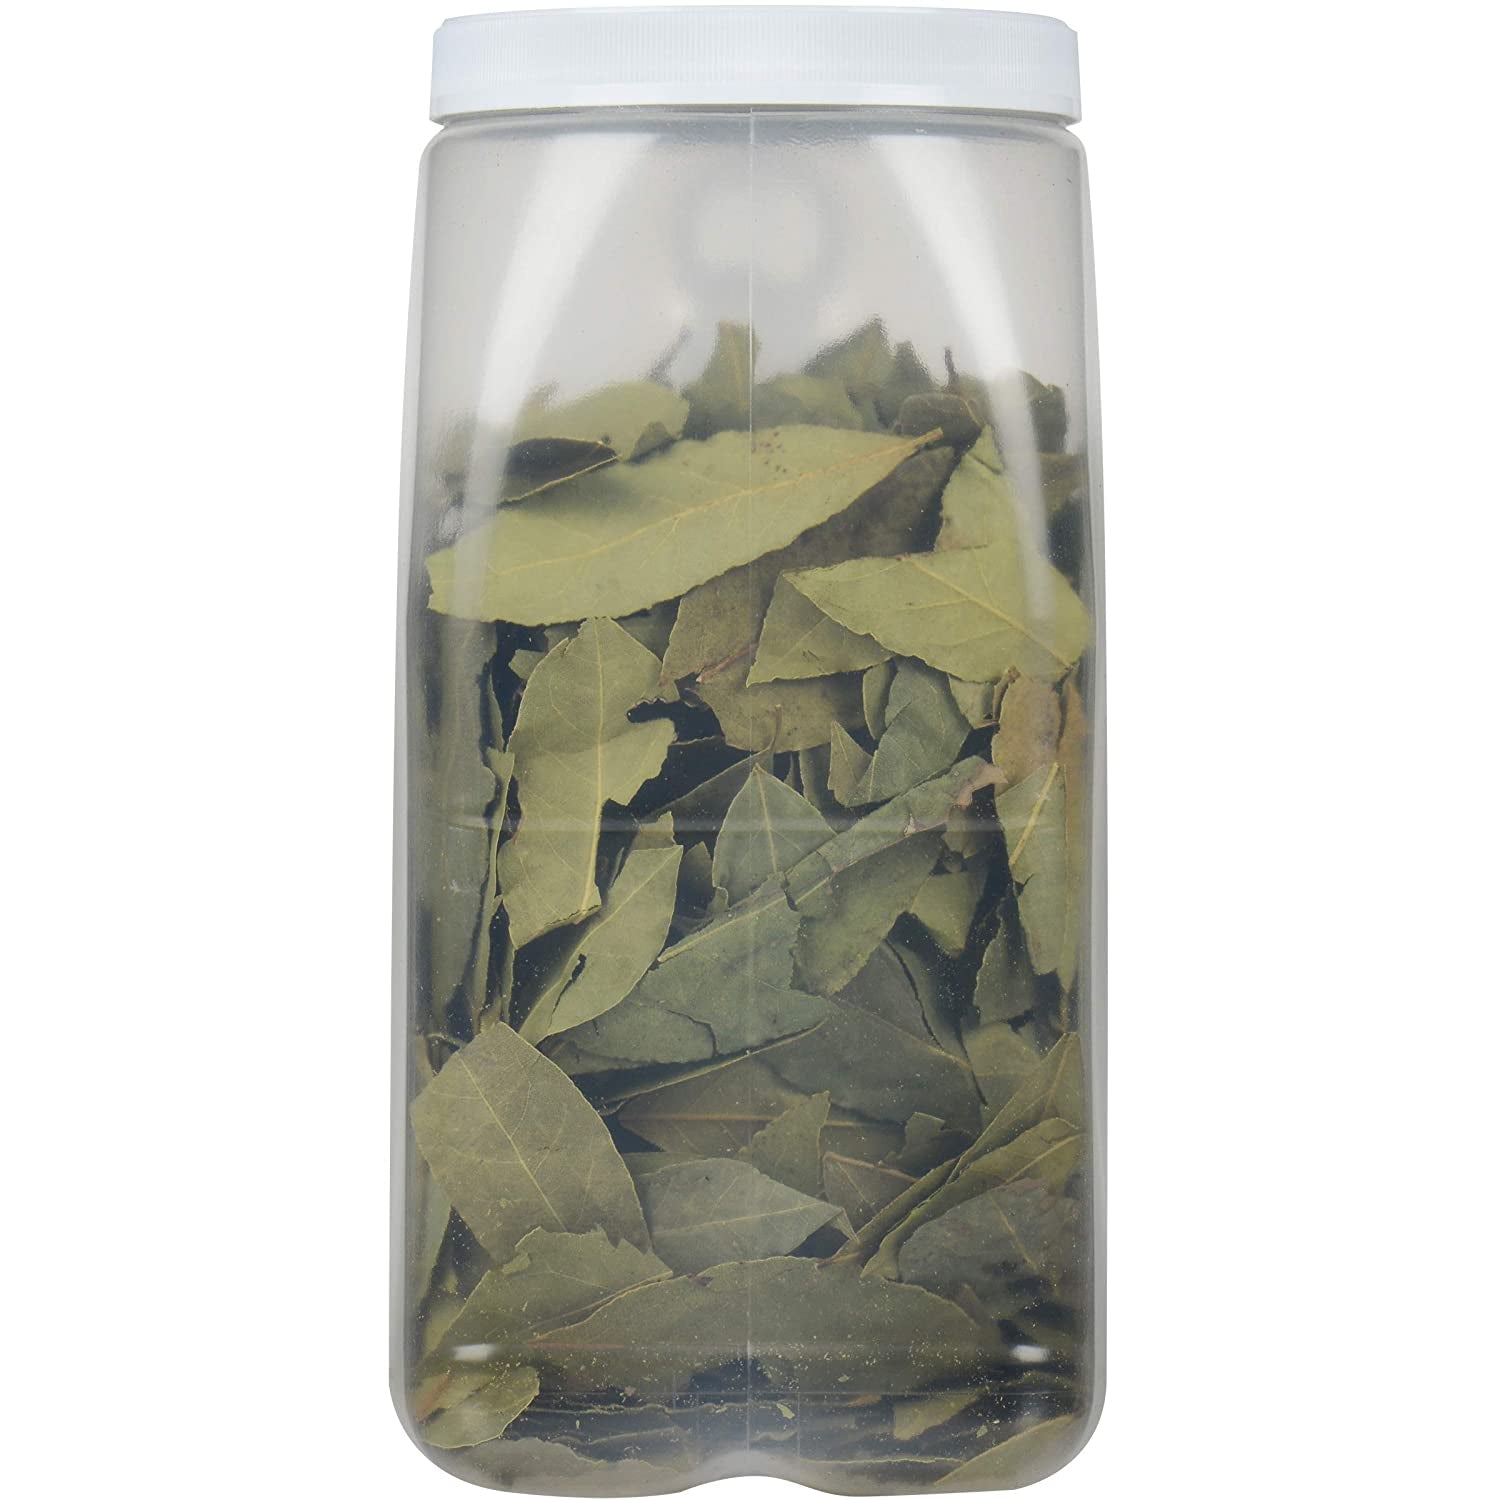 Whole Bay Leaves, 8 Oz - One 8 Ounce Container of Bulk Bay Leaves for Cooking, Great in Soups, Seafood Dishes, Meats and Marinades